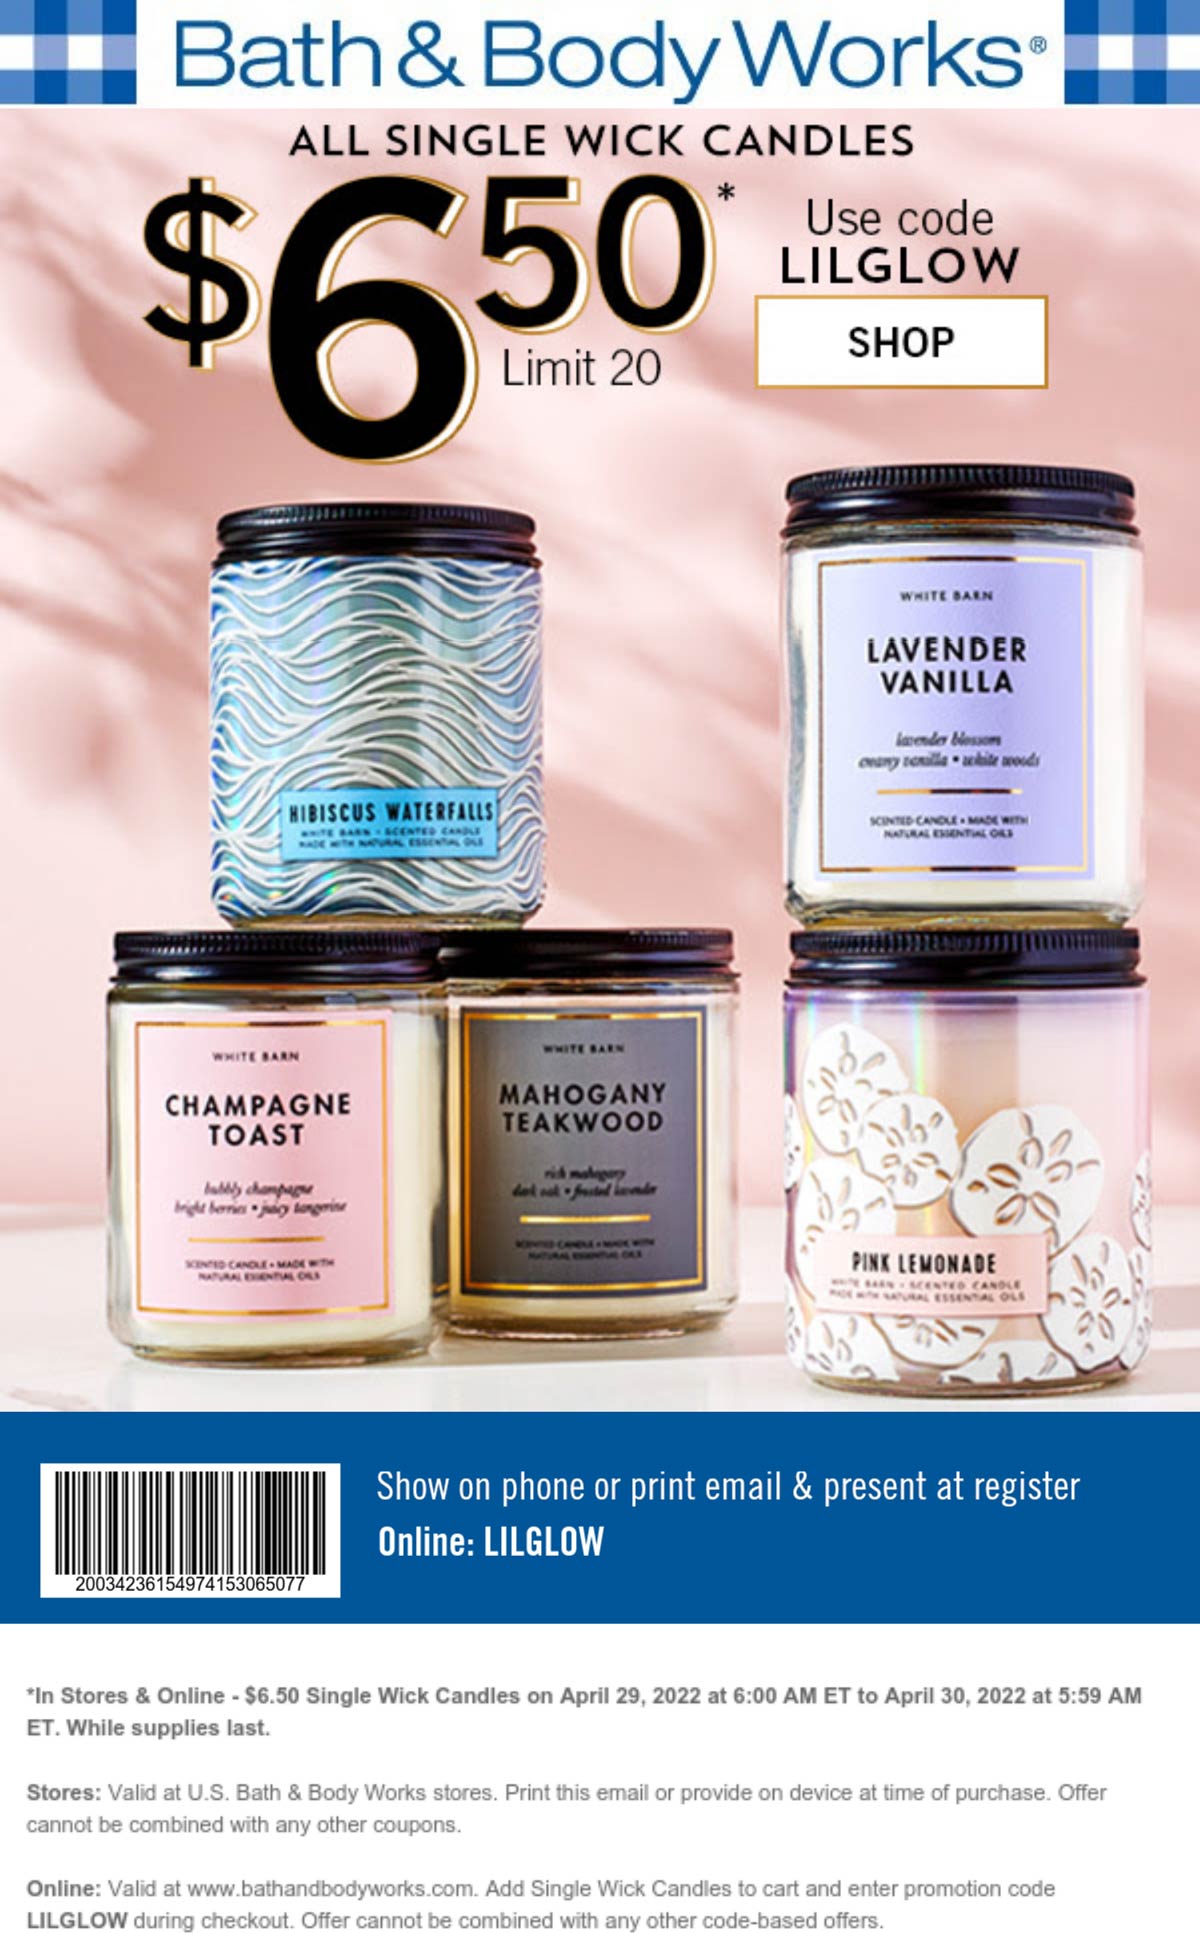 Bath & Body Works stores Coupon  $7 candles today at Bath & Body Works, or online via promo code LILGLOW #bathbodyworks 